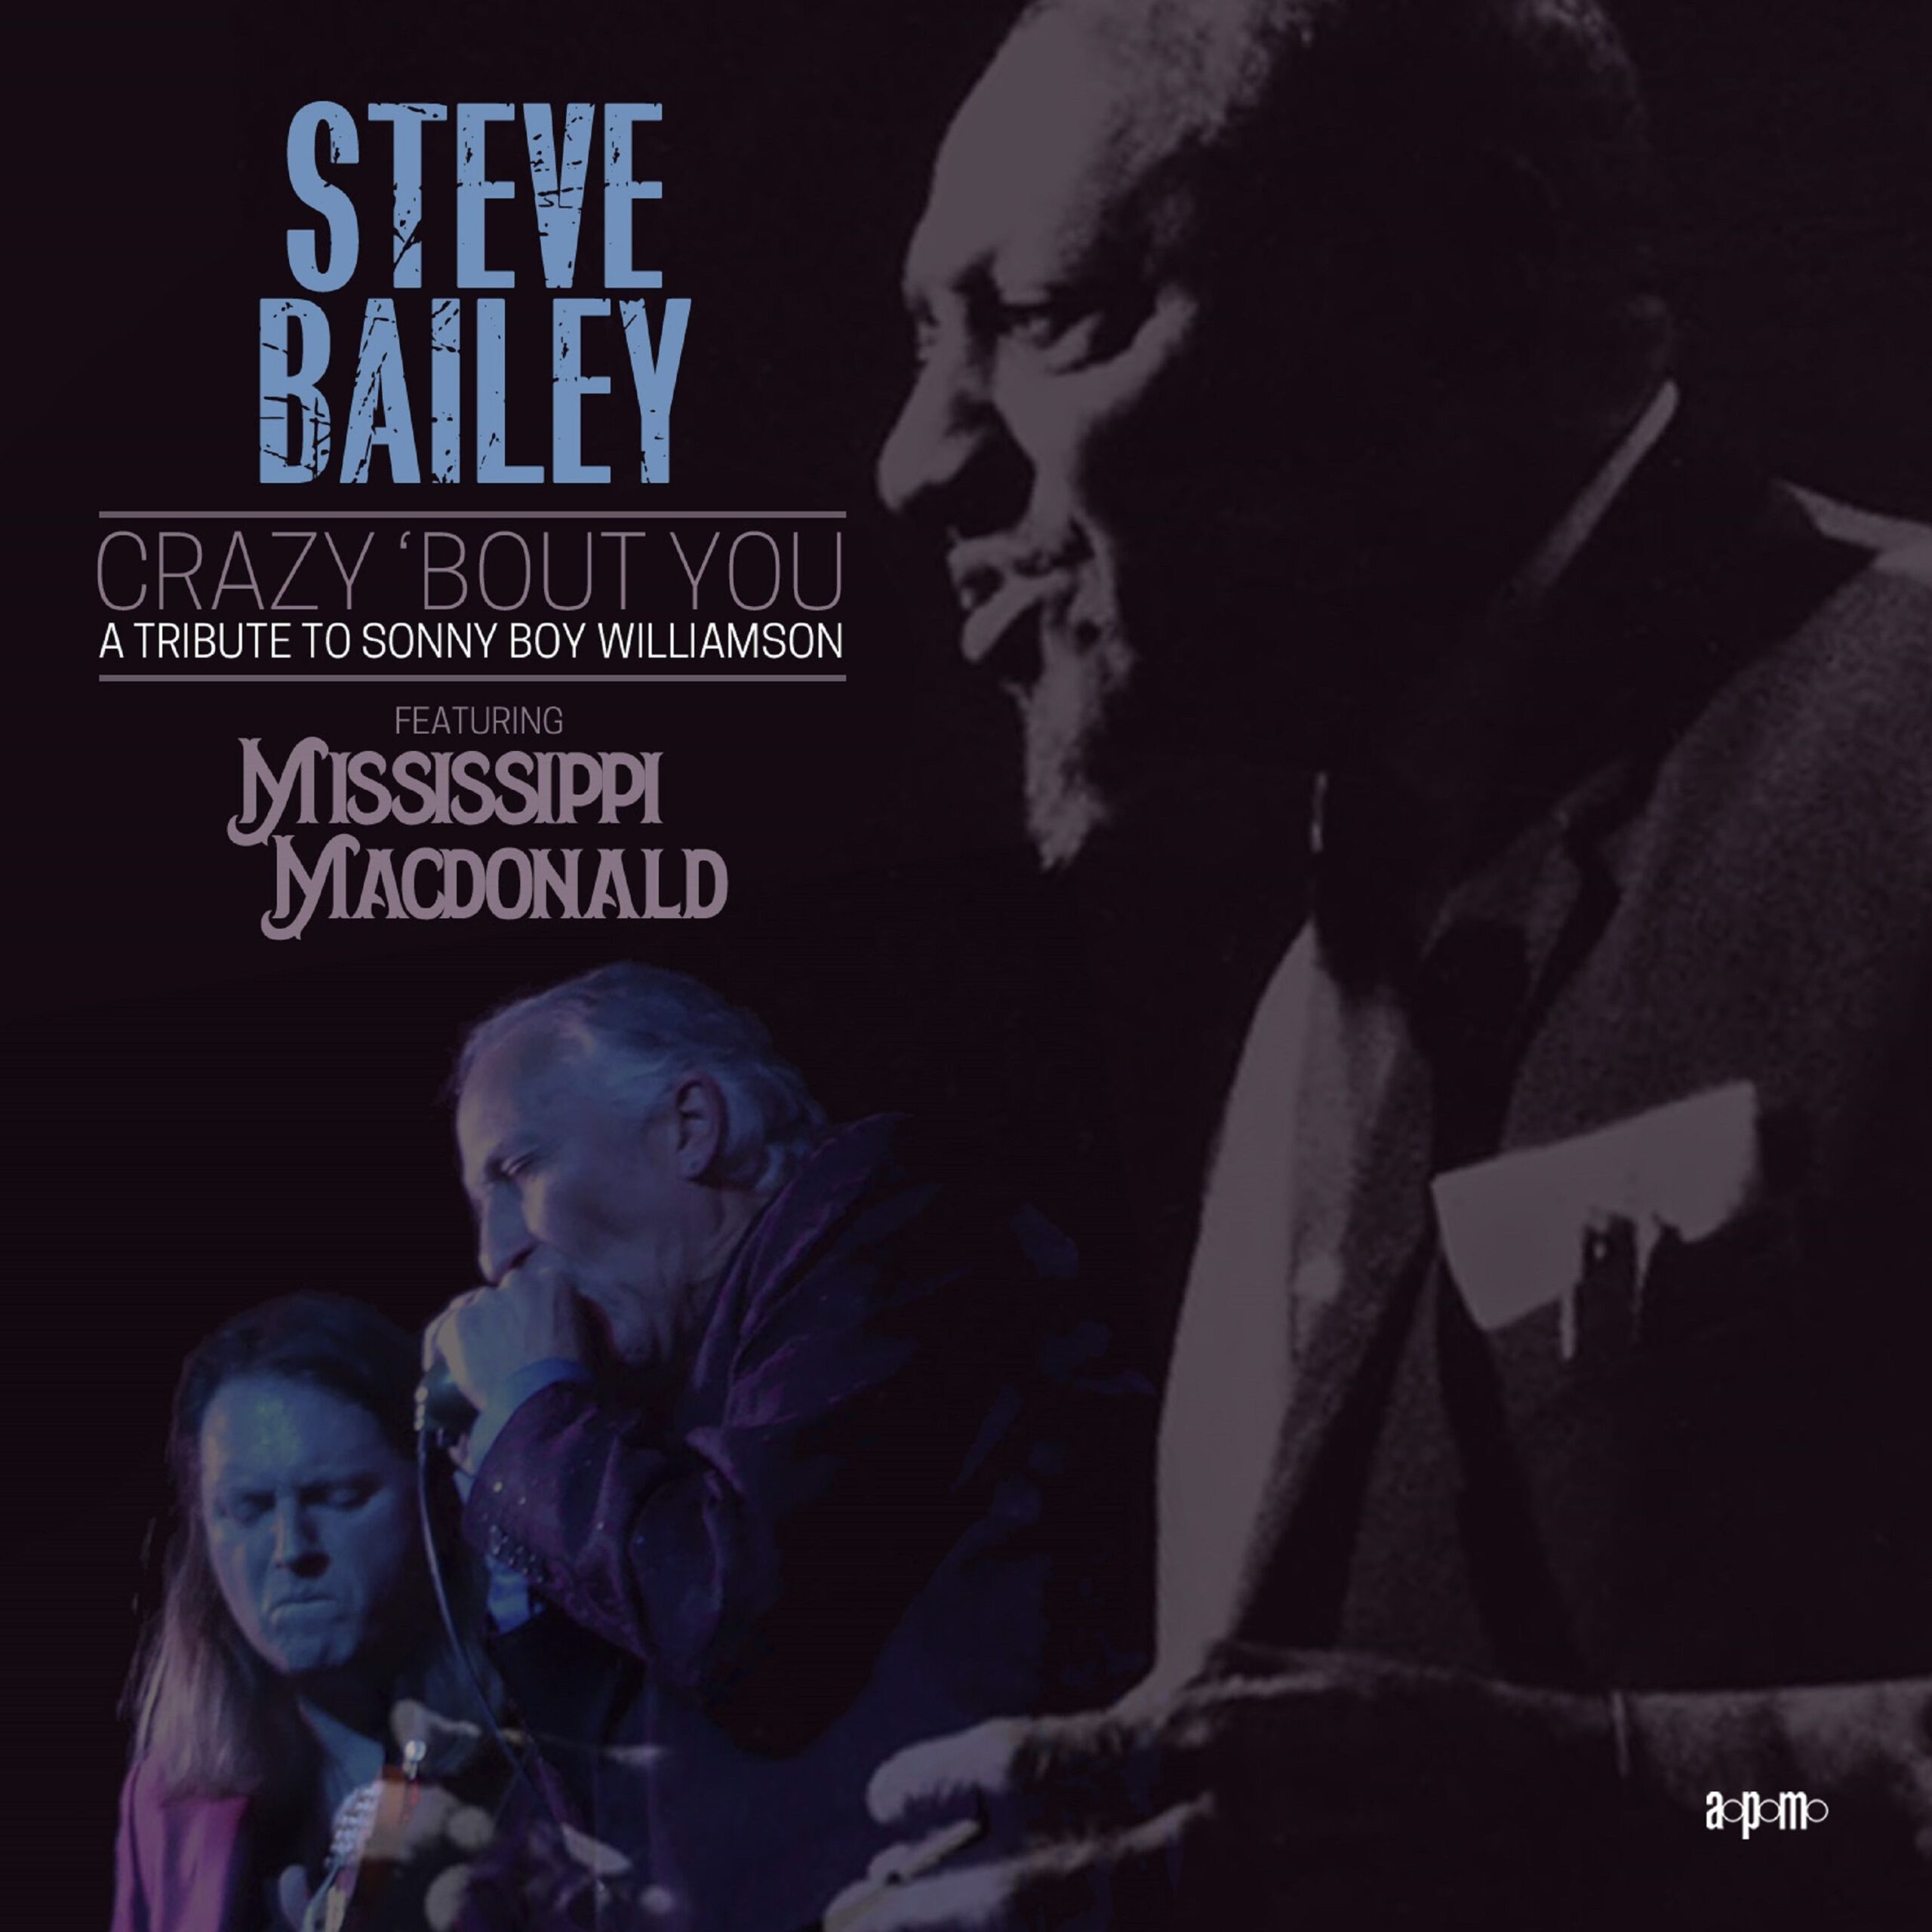 Steve Bailey - Crazy 'Bout You A Tribute to Sonny Boy Williamson